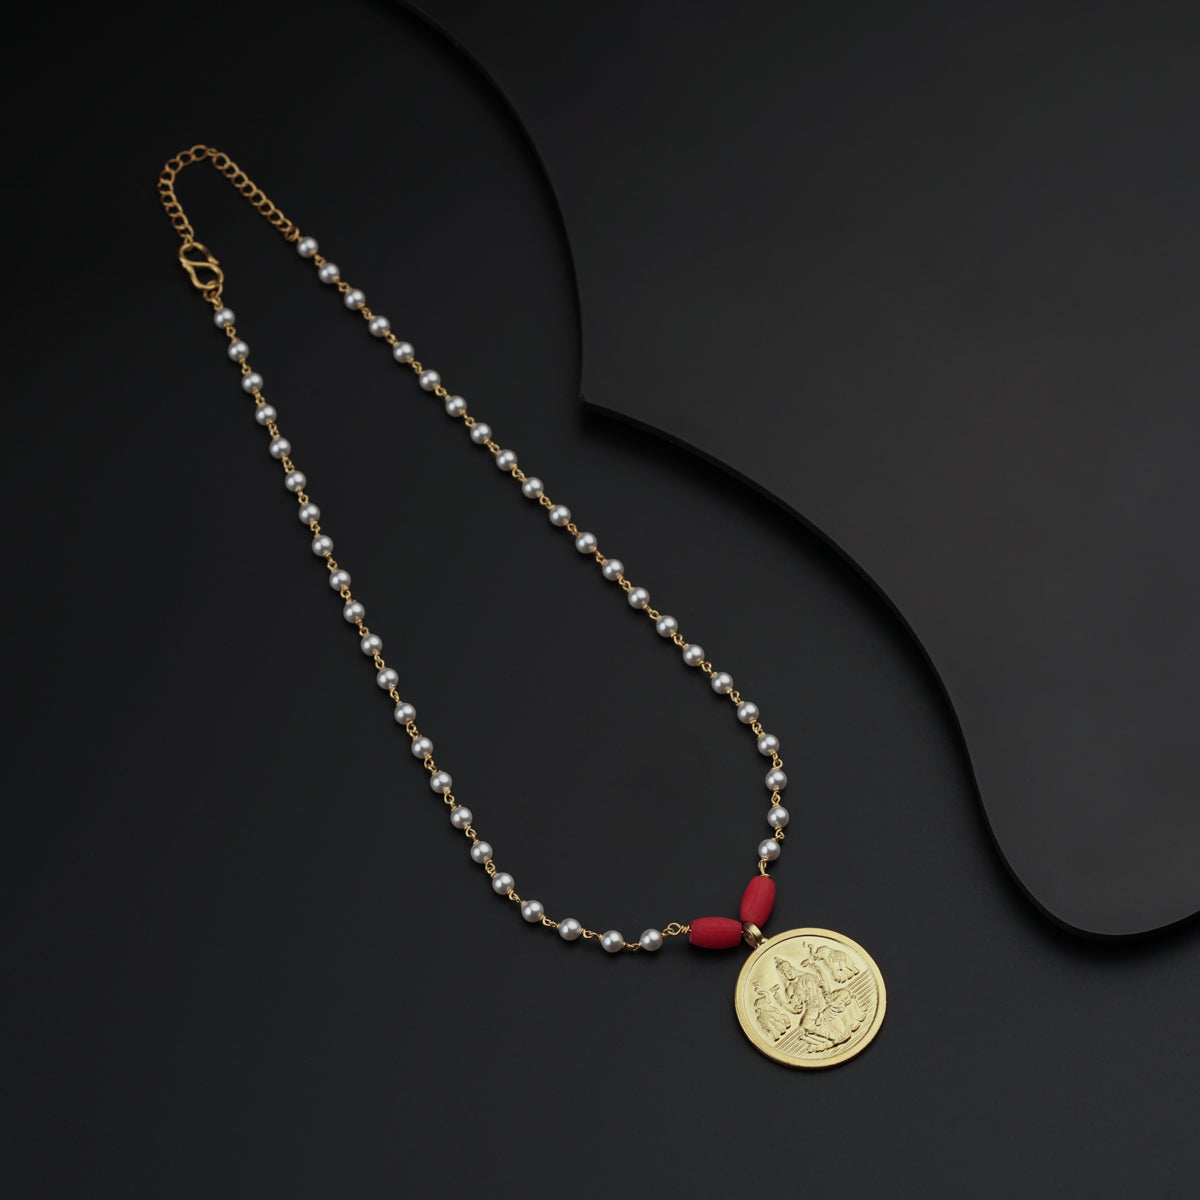 Silver Coin Necklace Gold Plated with Pearls